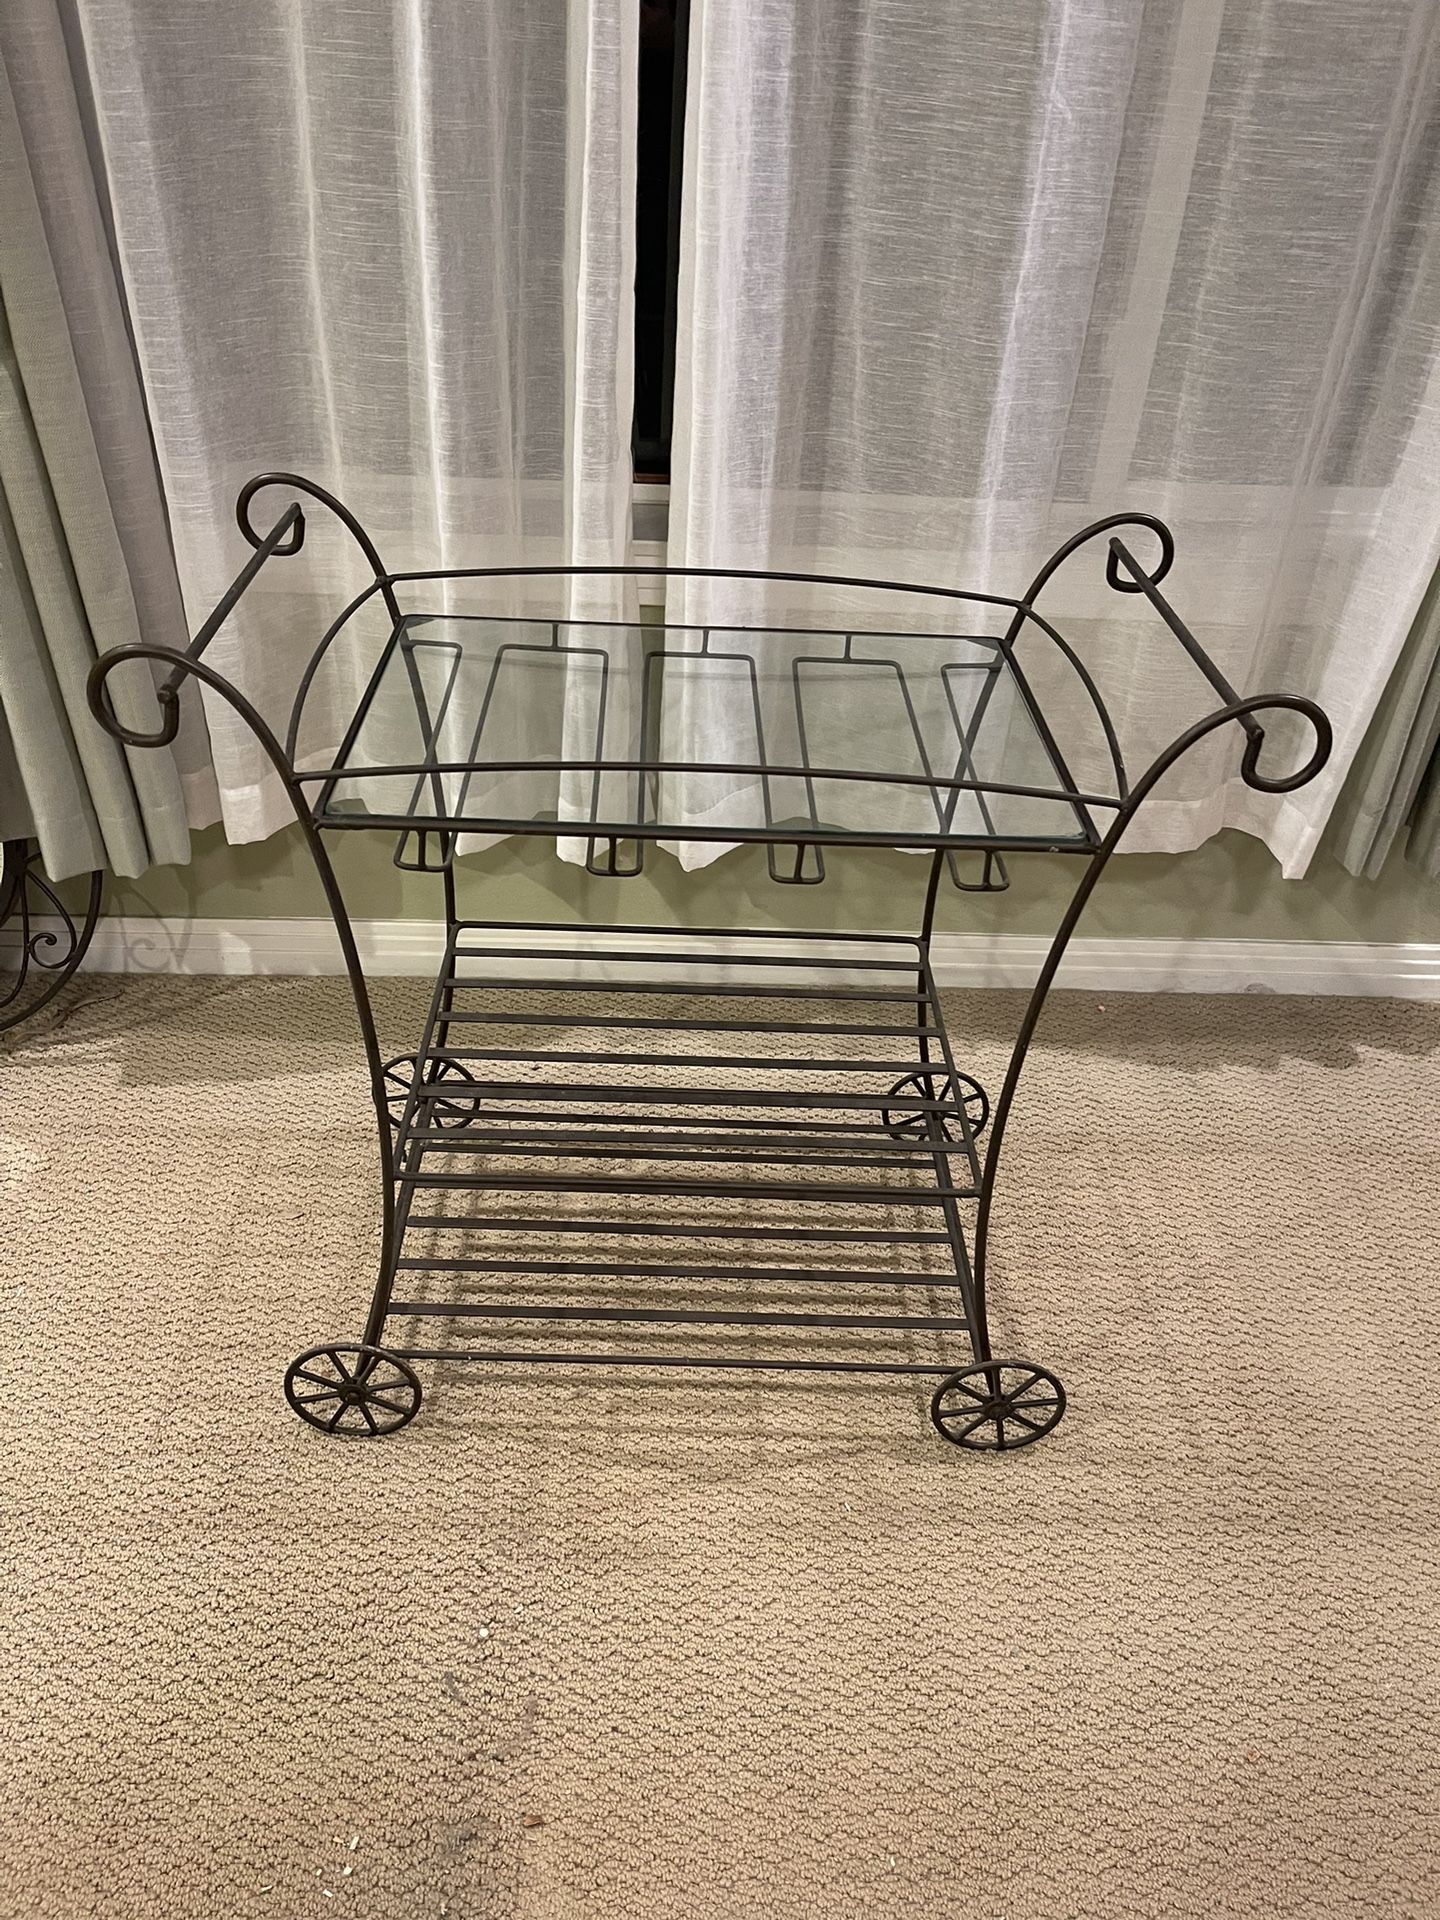 Beautiful And Unique Tea Cart Or Table -  All Metal With Glass Top Serving Cart Or Bar Serving 